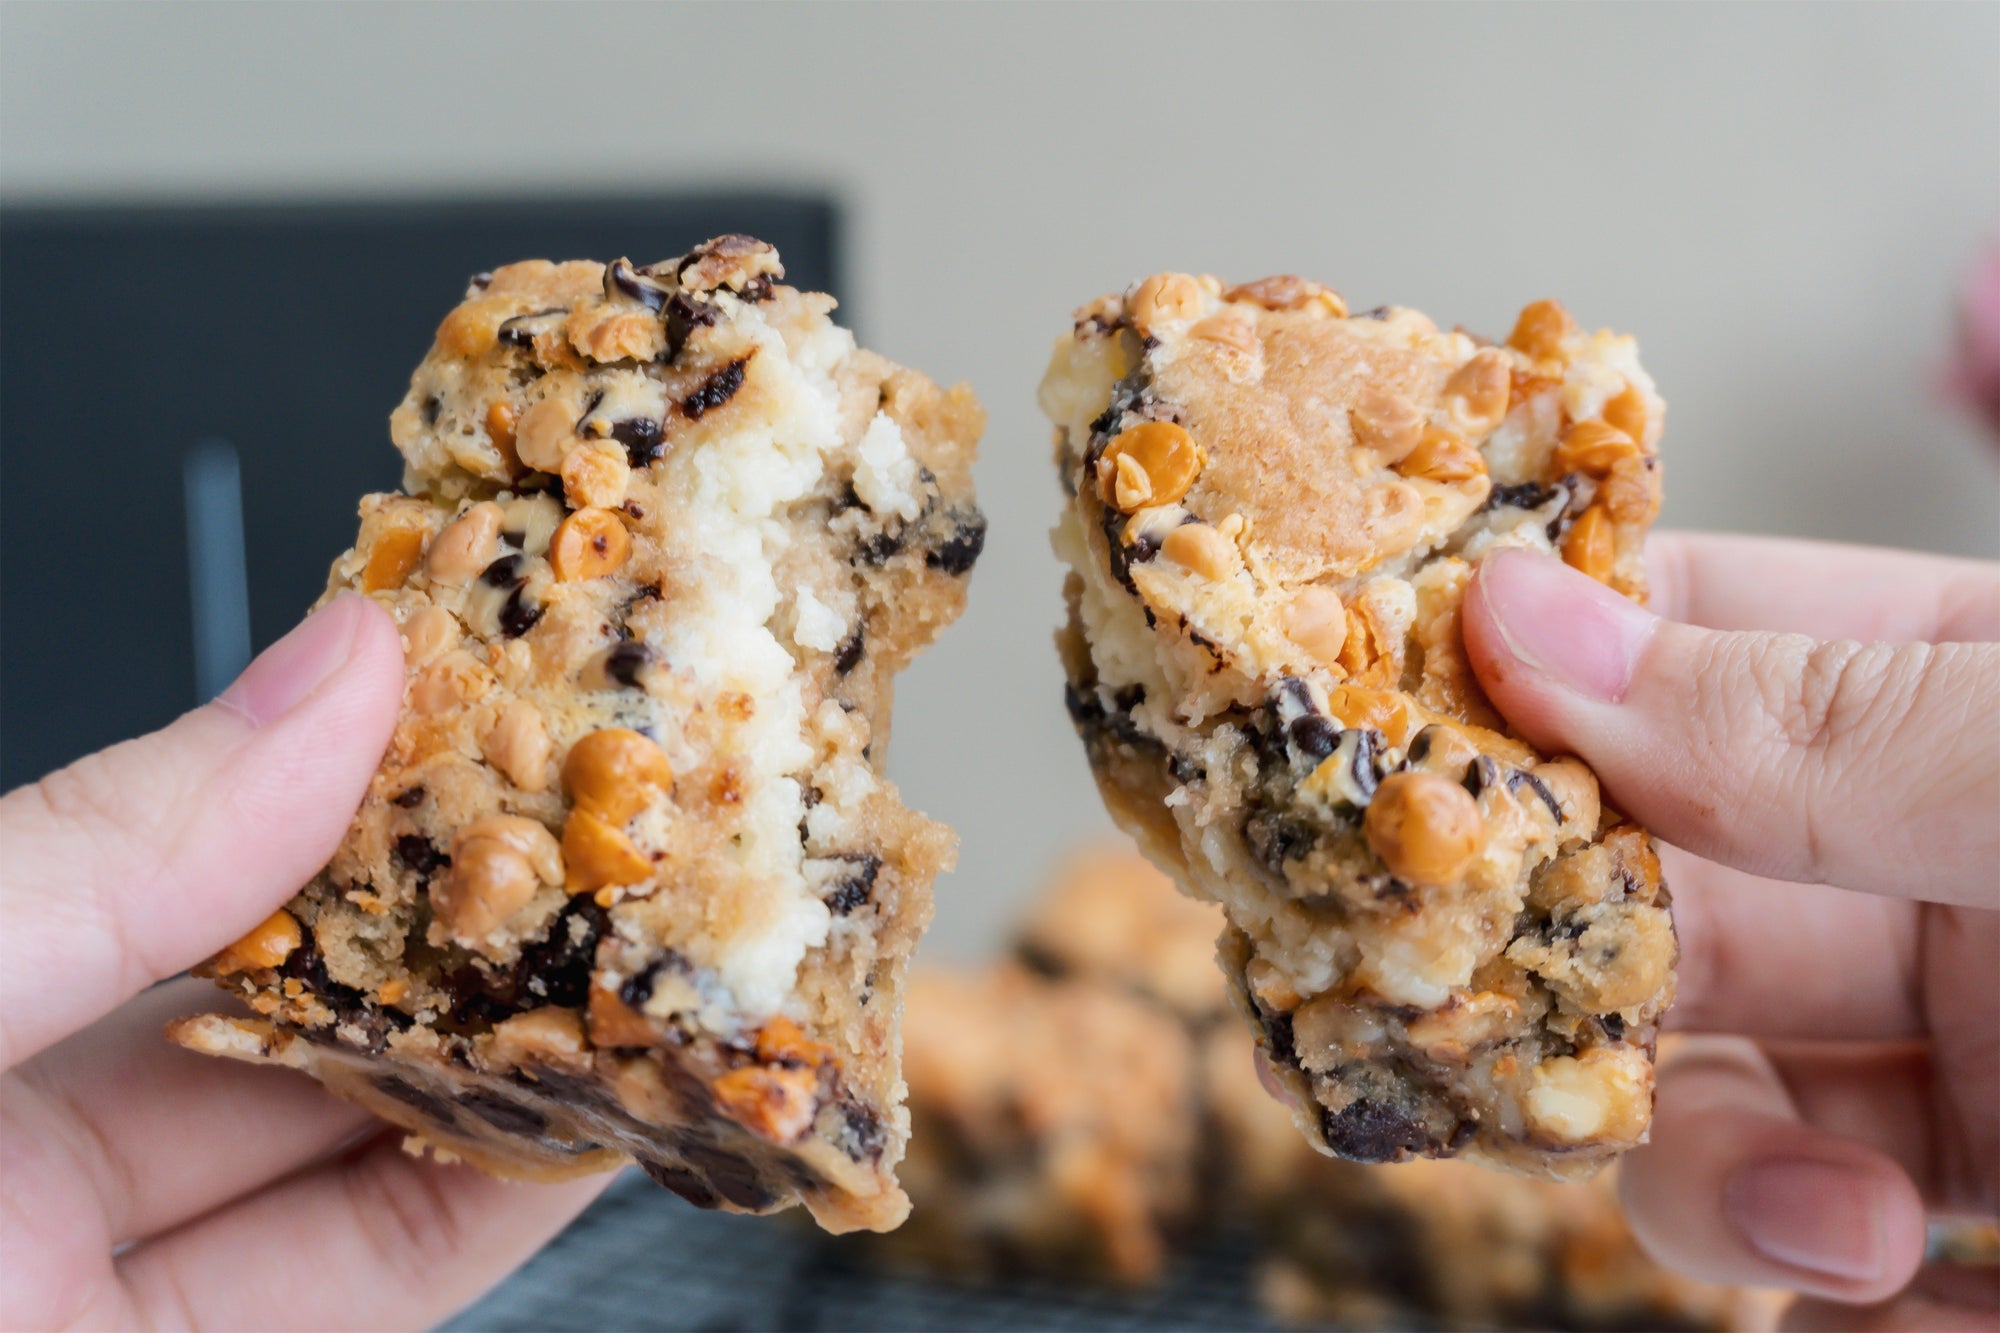 March's Kit: Chocolate Chip Cookie Cheesecake Bars